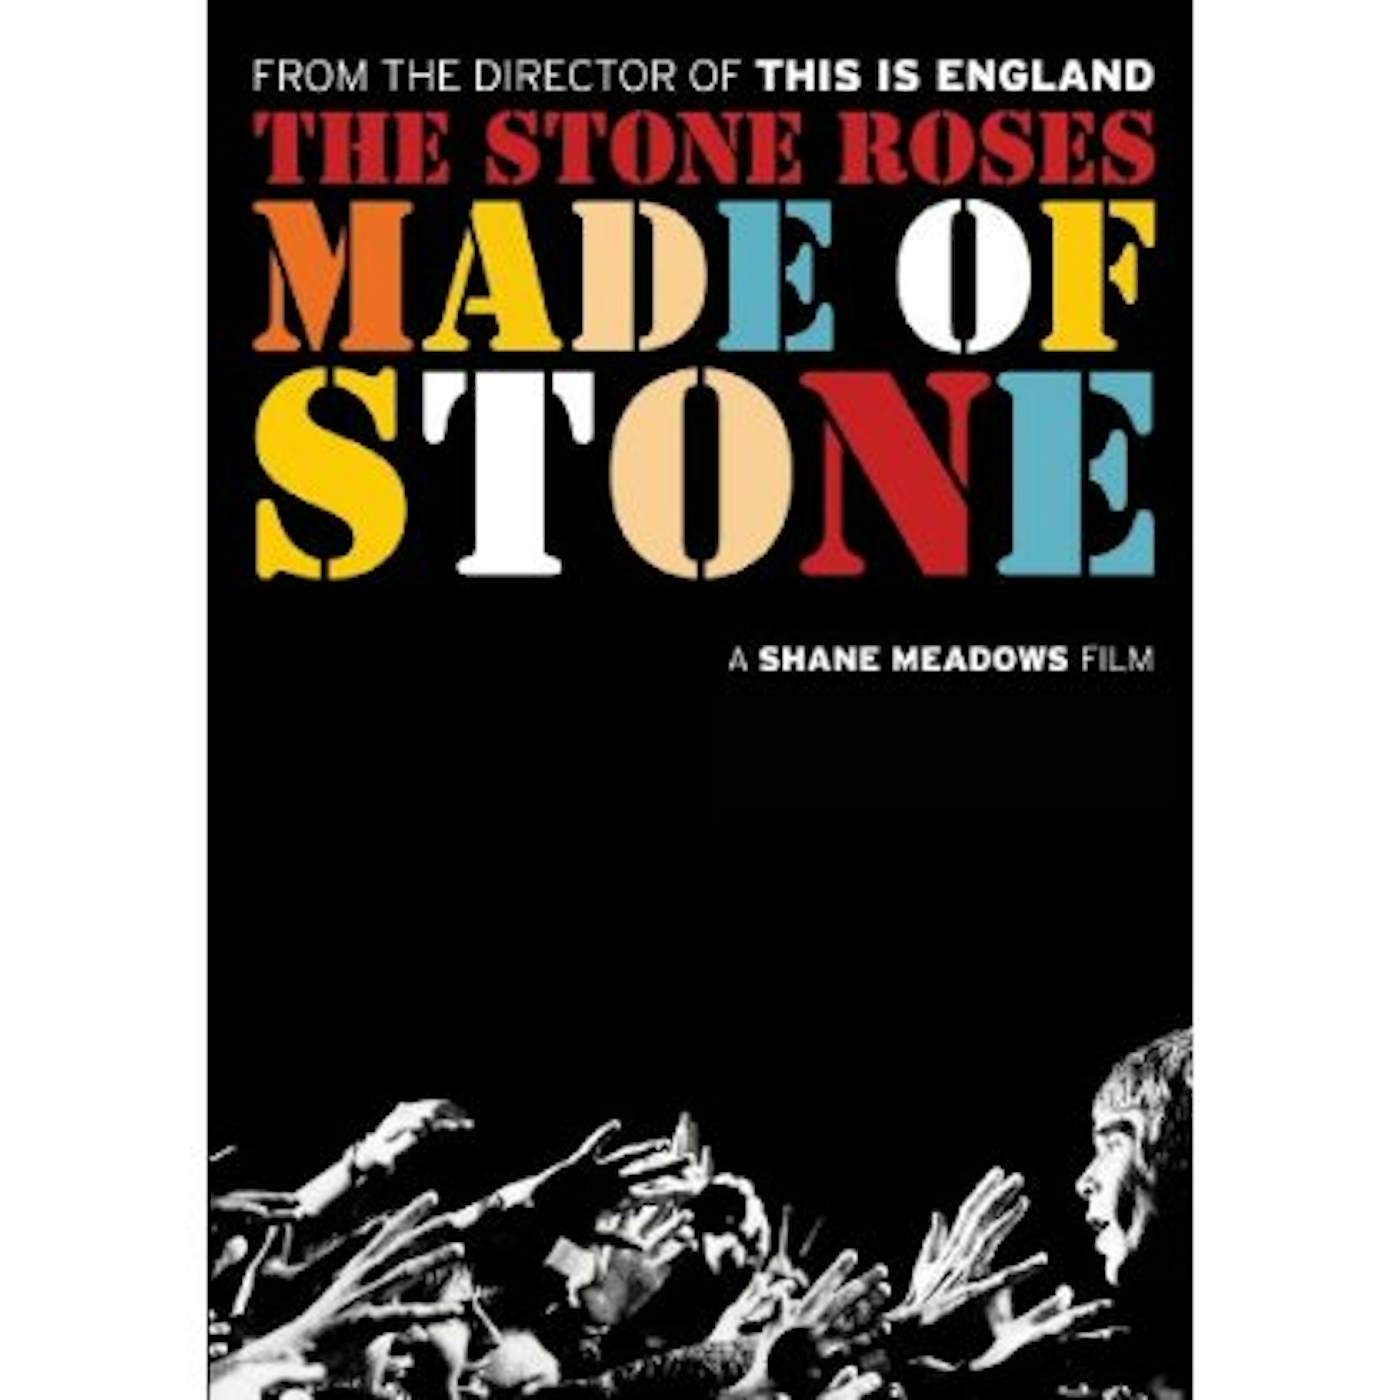 The Stone Roses MADE OF STONE DVD